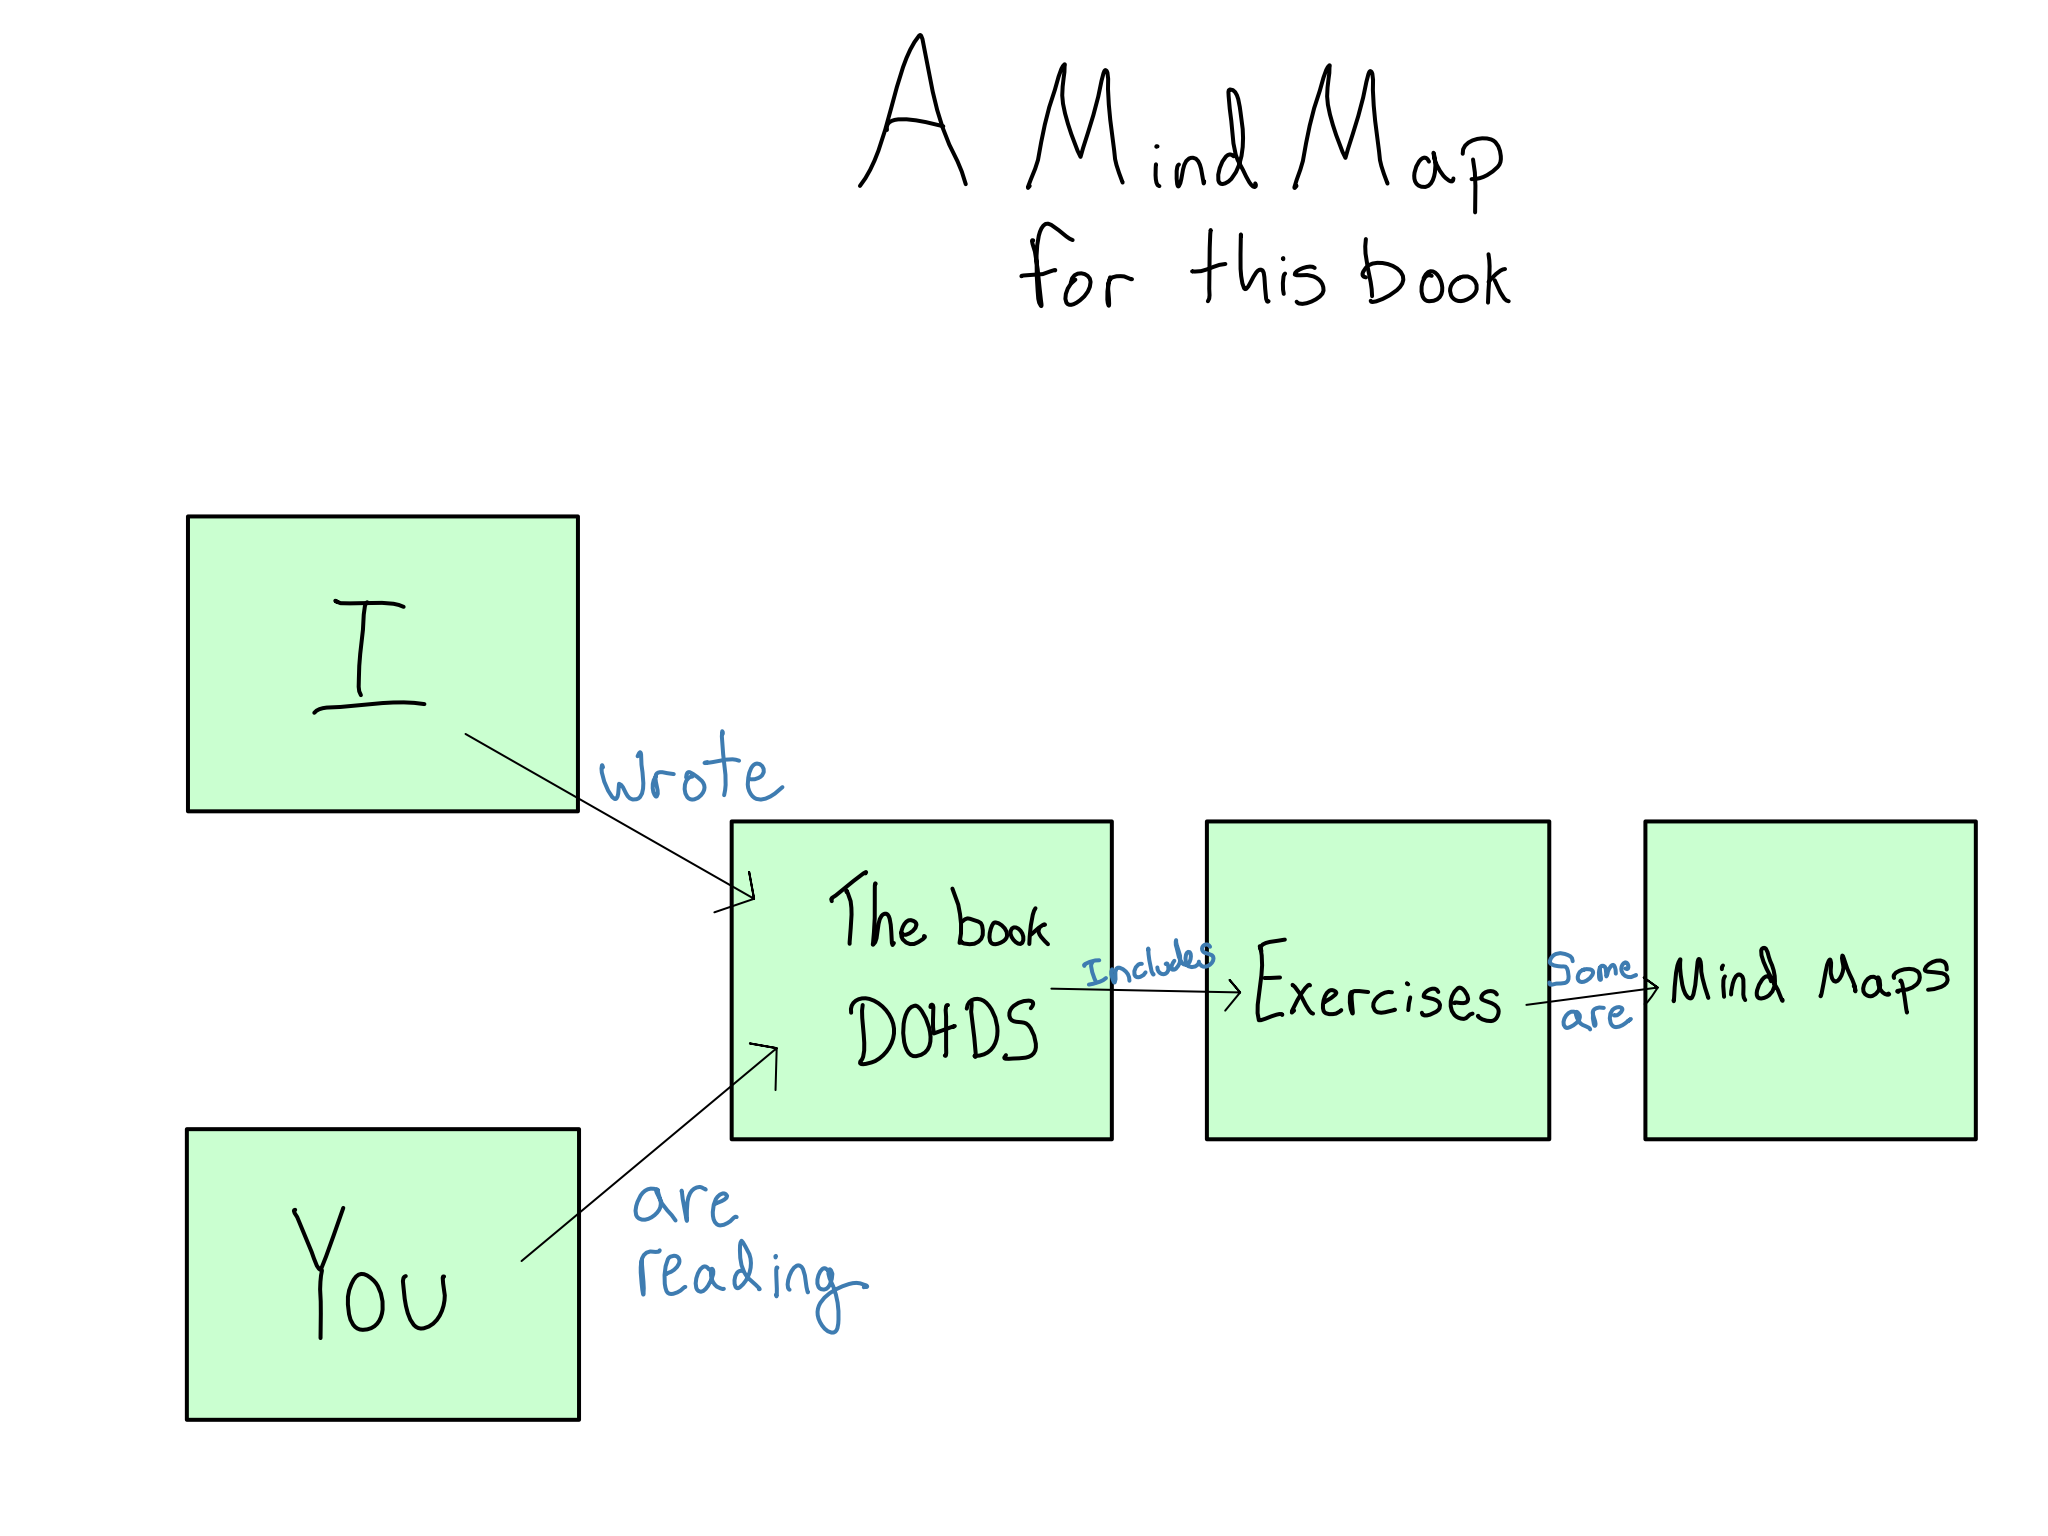 A mindmap for this book: I *wrote* and YOU *read* DO4DS. DO4DS *includes* EXERCISES, *some are* MIND MAPS.